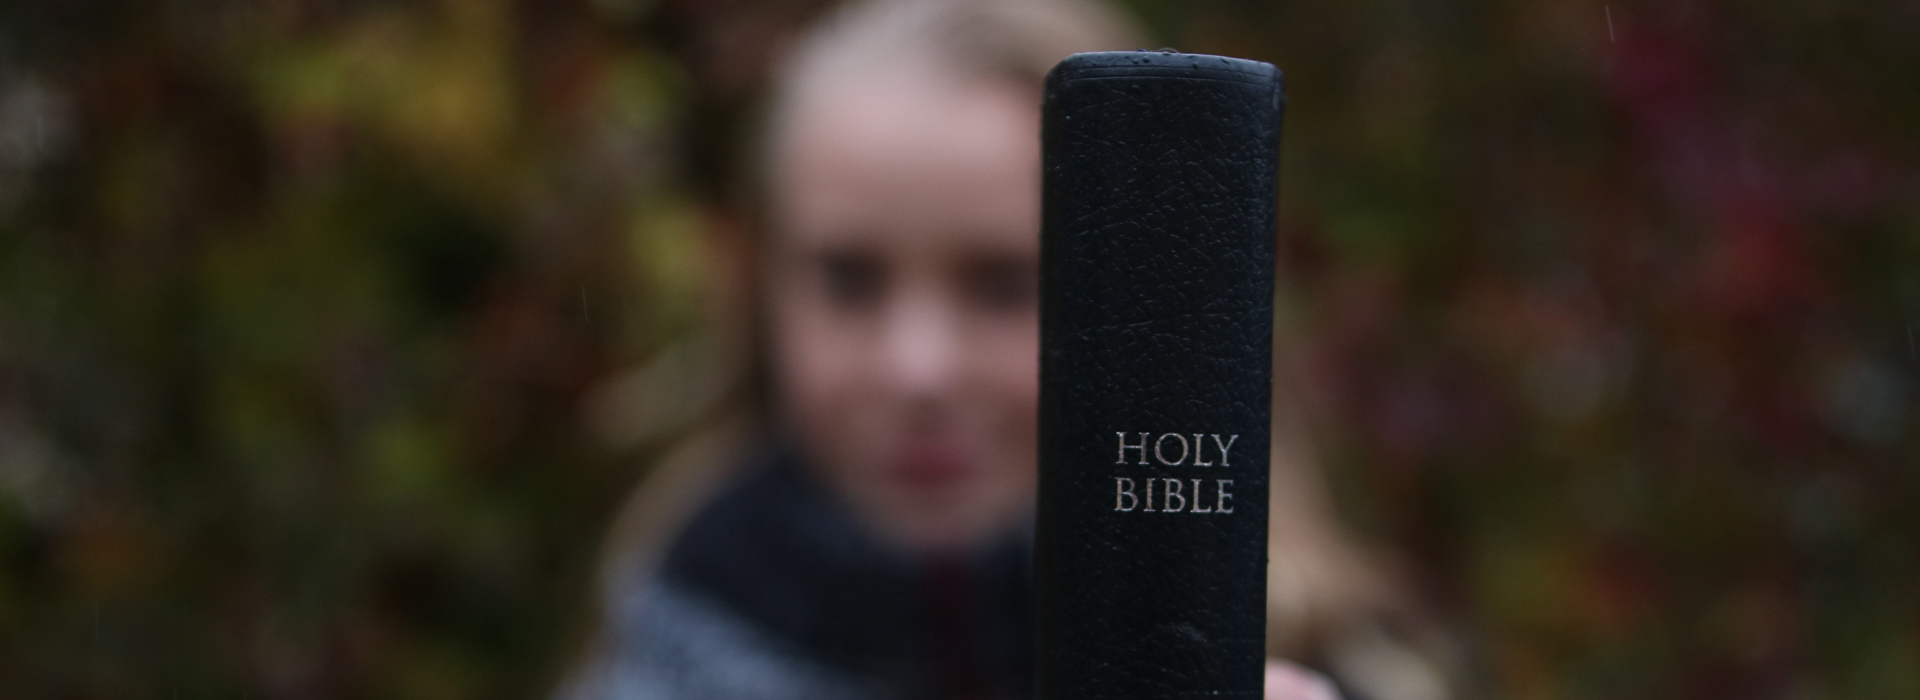 Holy Bible - What we belive